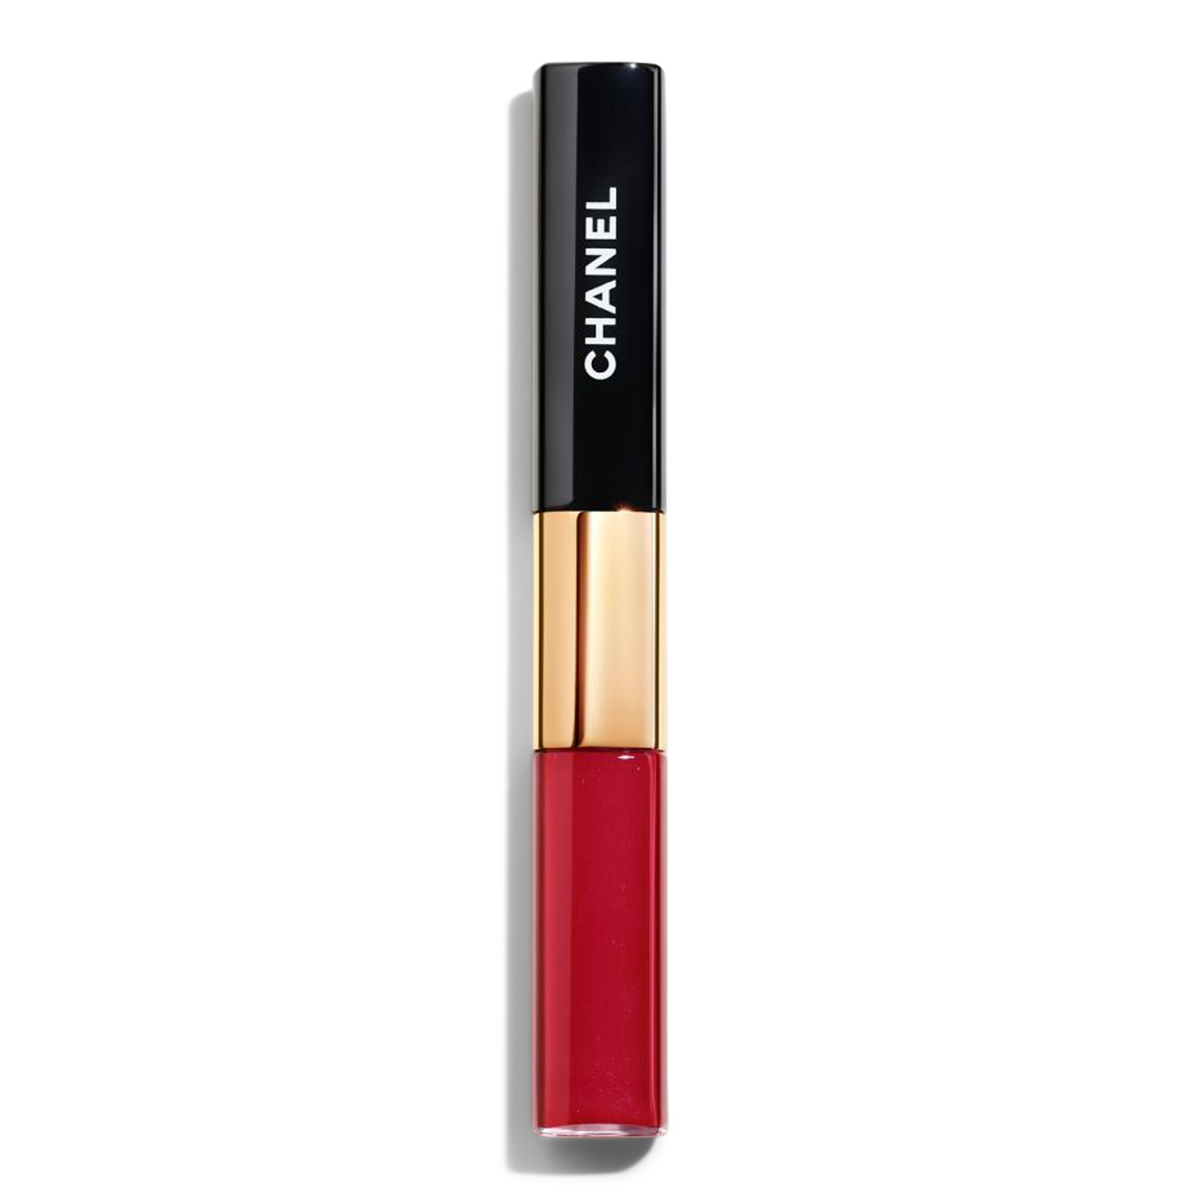 RANEE Clothing and Cosmetics - Chanel lipstick 💄 4 pc Just rs 1100/